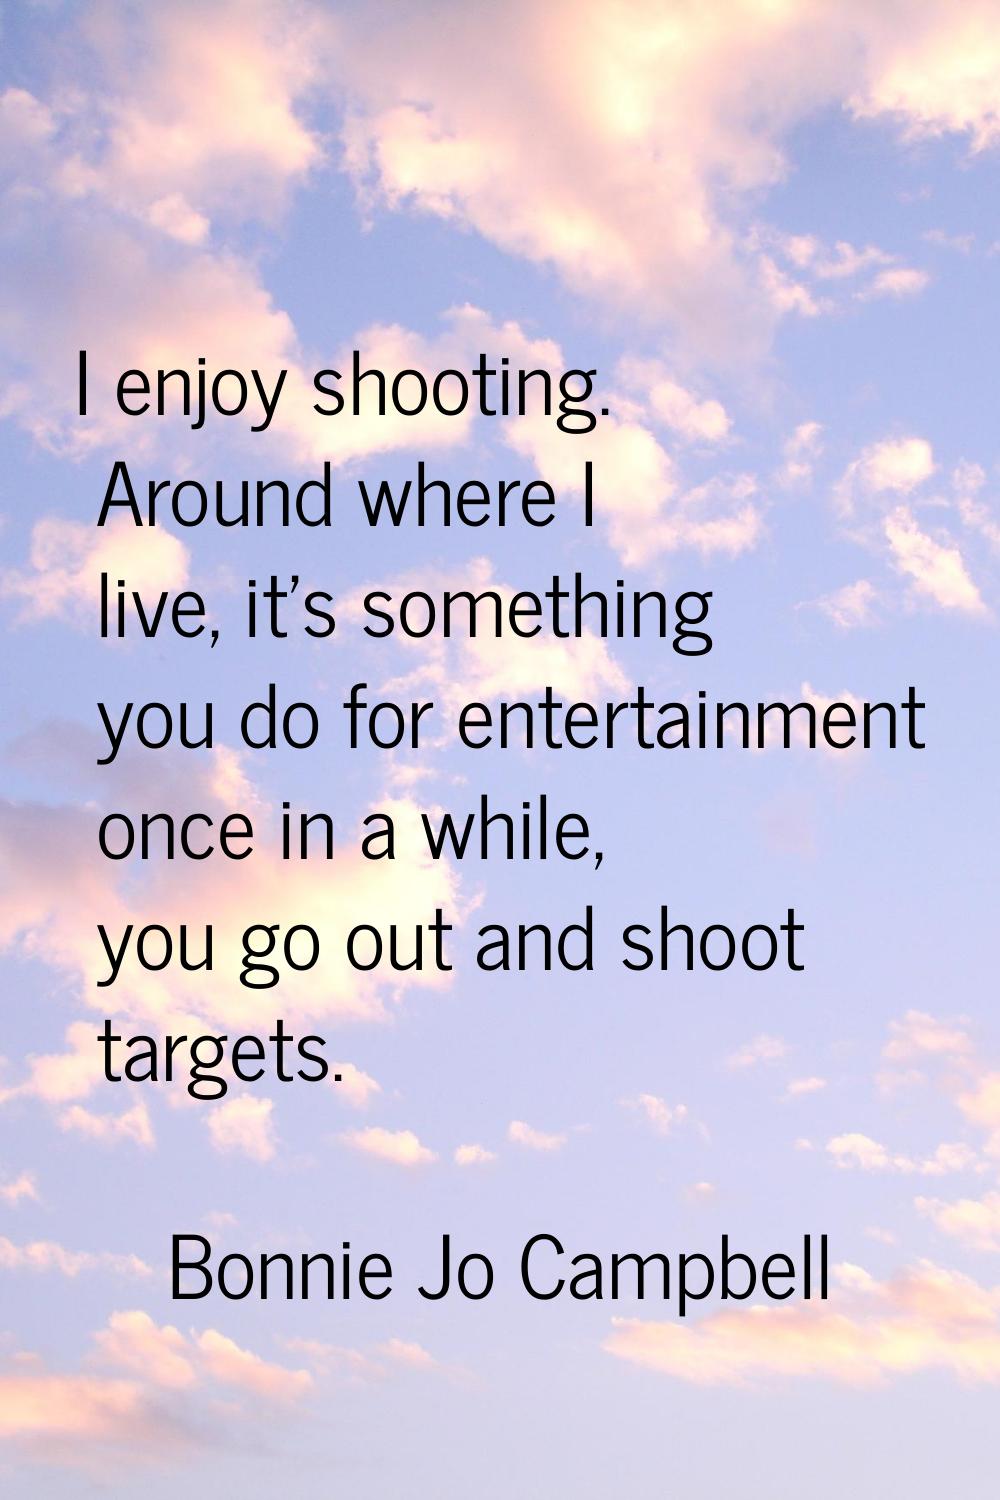 I enjoy shooting. Around where I live, it's something you do for entertainment once in a while, you